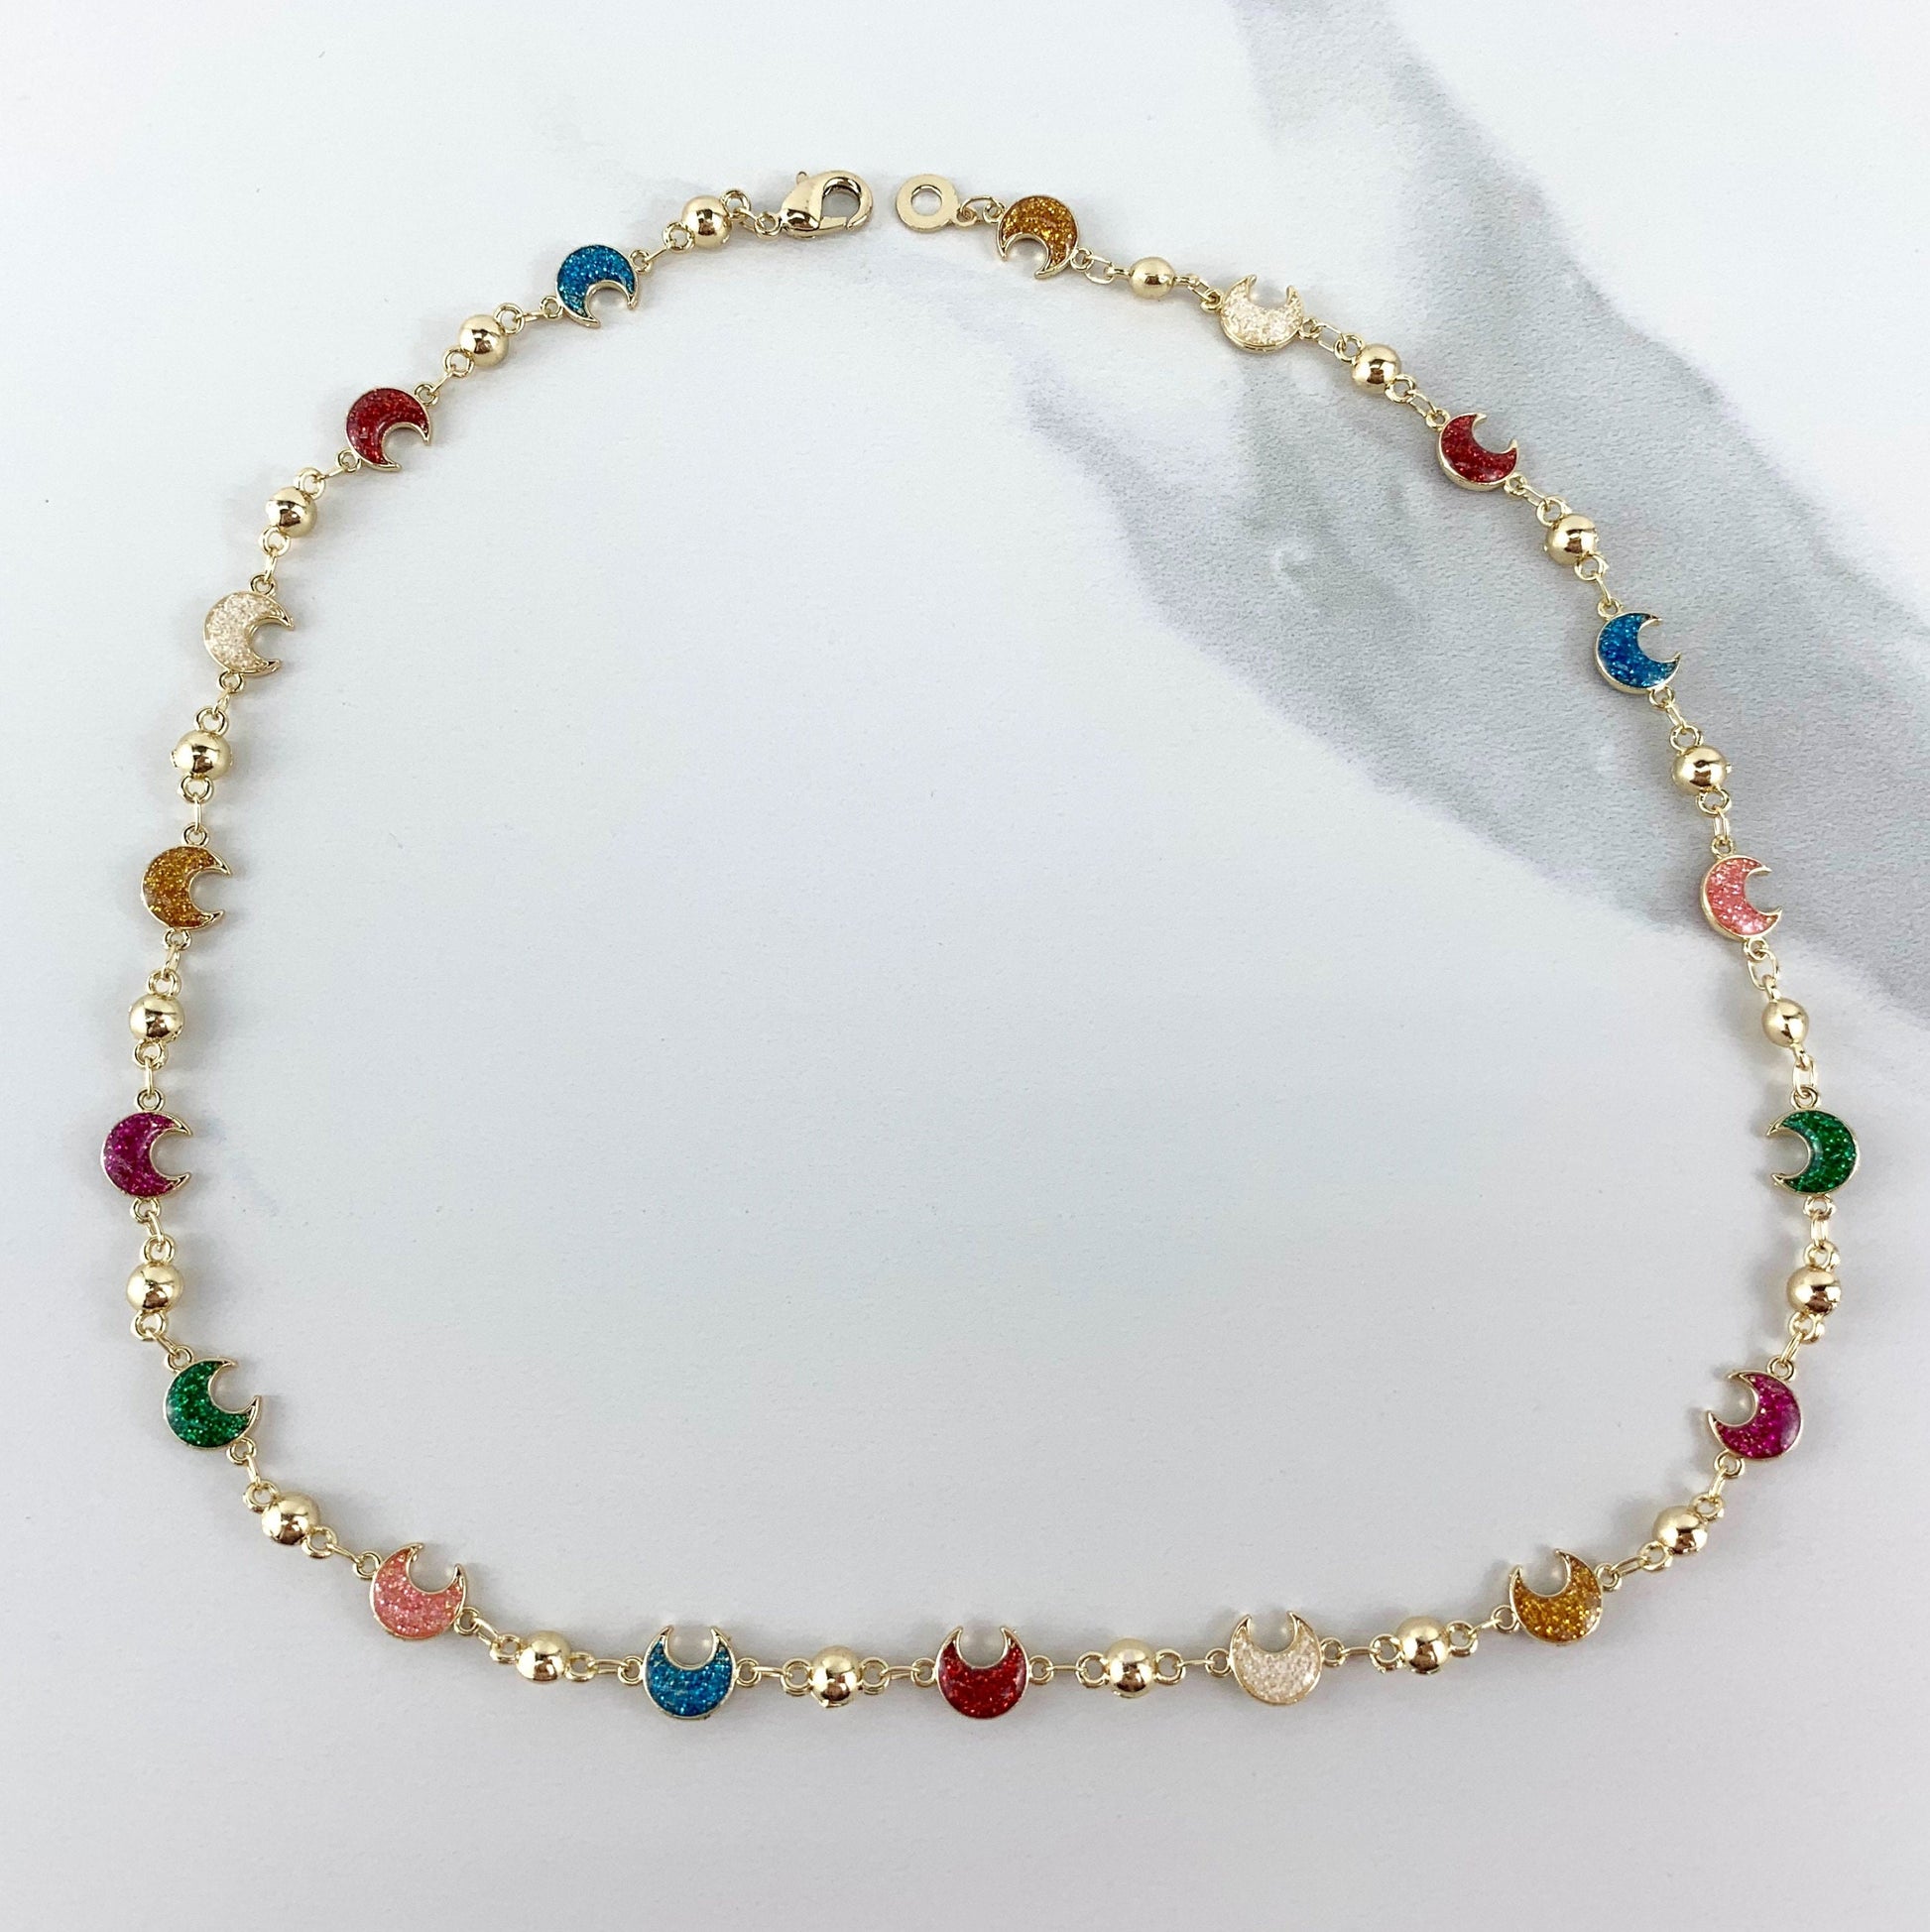 18k Gold Filled Bead Chain Featuring Colorful Sparkle Moon Simulated Druse Stones Necklace Wholesale Jewelry Supplies